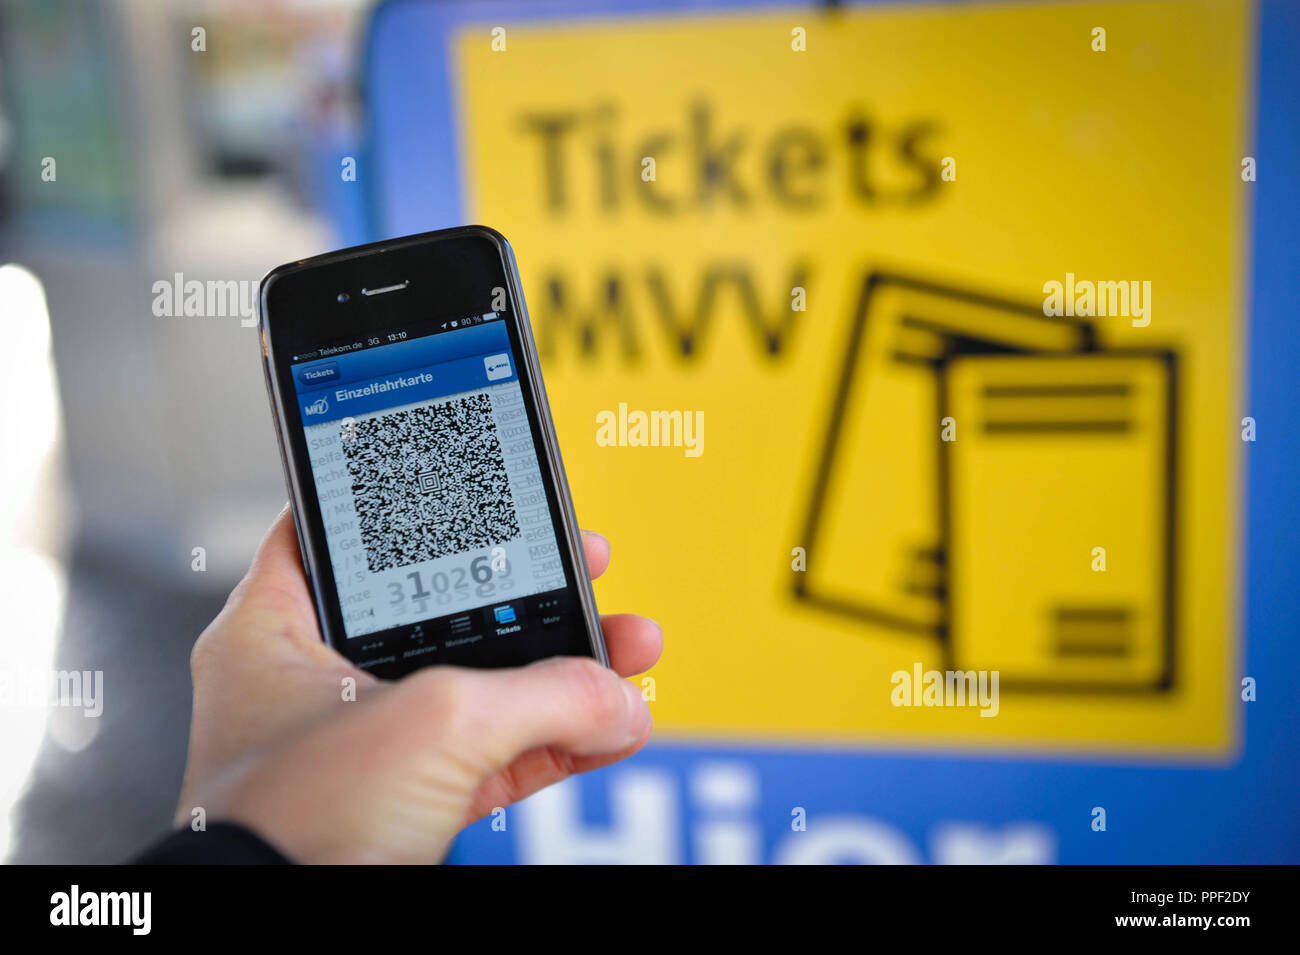 As of Sunday, 15 December, the Muenchner Verkehrsgesellschaft (MVG) also offers electronic tickets. The HandyTicket and the PrintTicket from the PC are valid throughout the Munich transport network, including U-Bahn, S-Bahn, bus and tram, as well as regional bus and train services in the MVV tariff area. Stock Photo